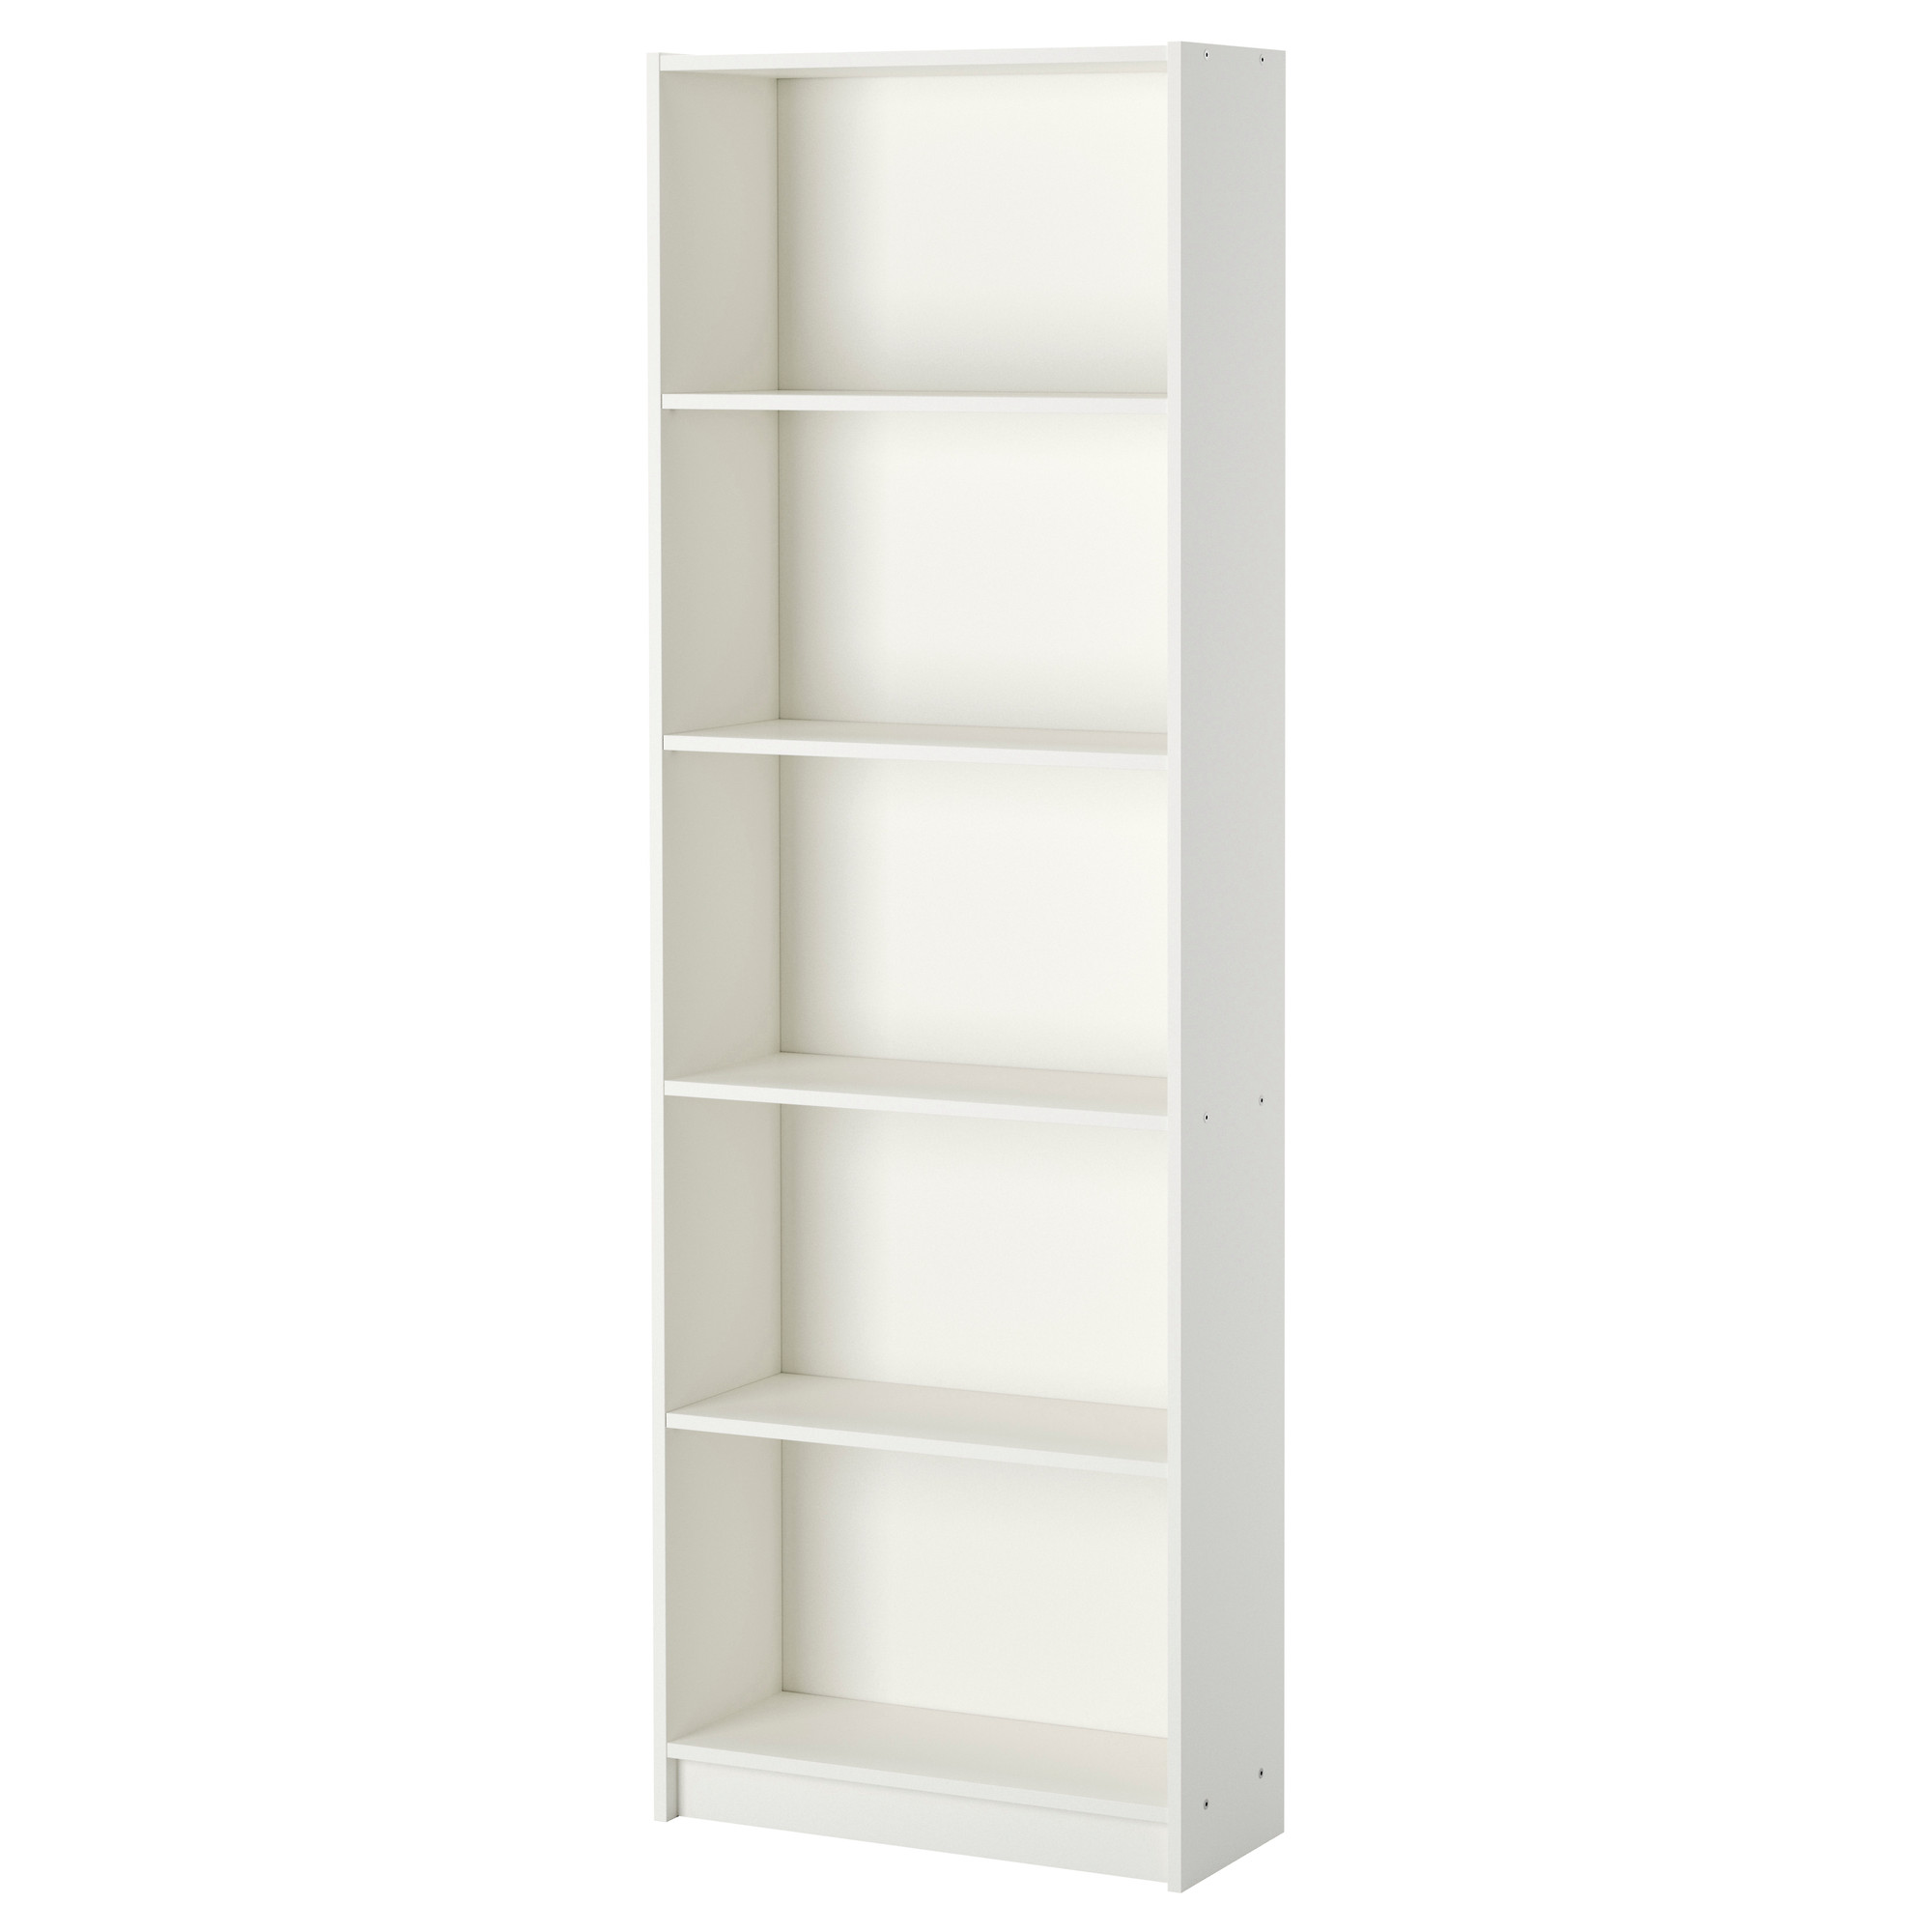 Master GERSBY Bookcase - IKEA tall white bookcase